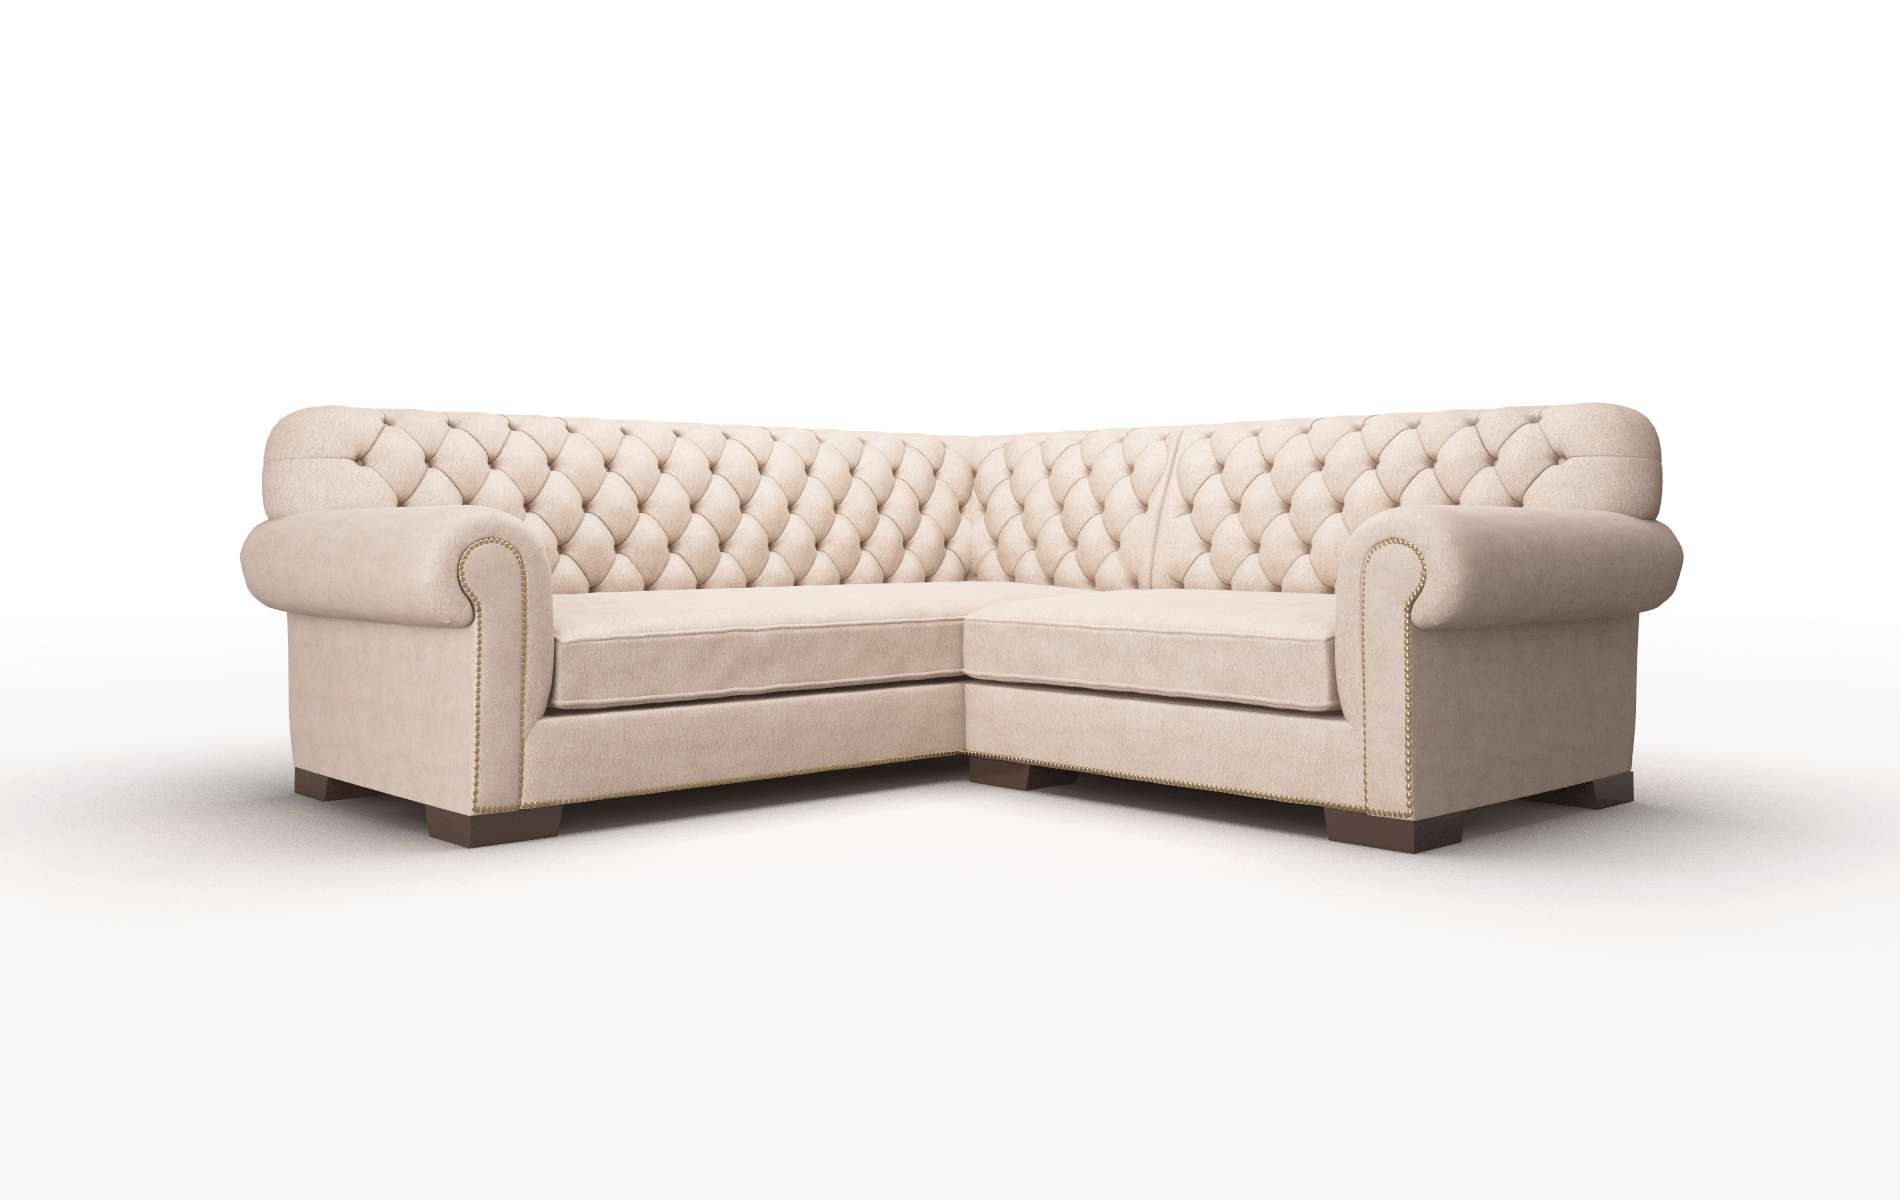 Chester Bella Pewter Sectional espresso legs